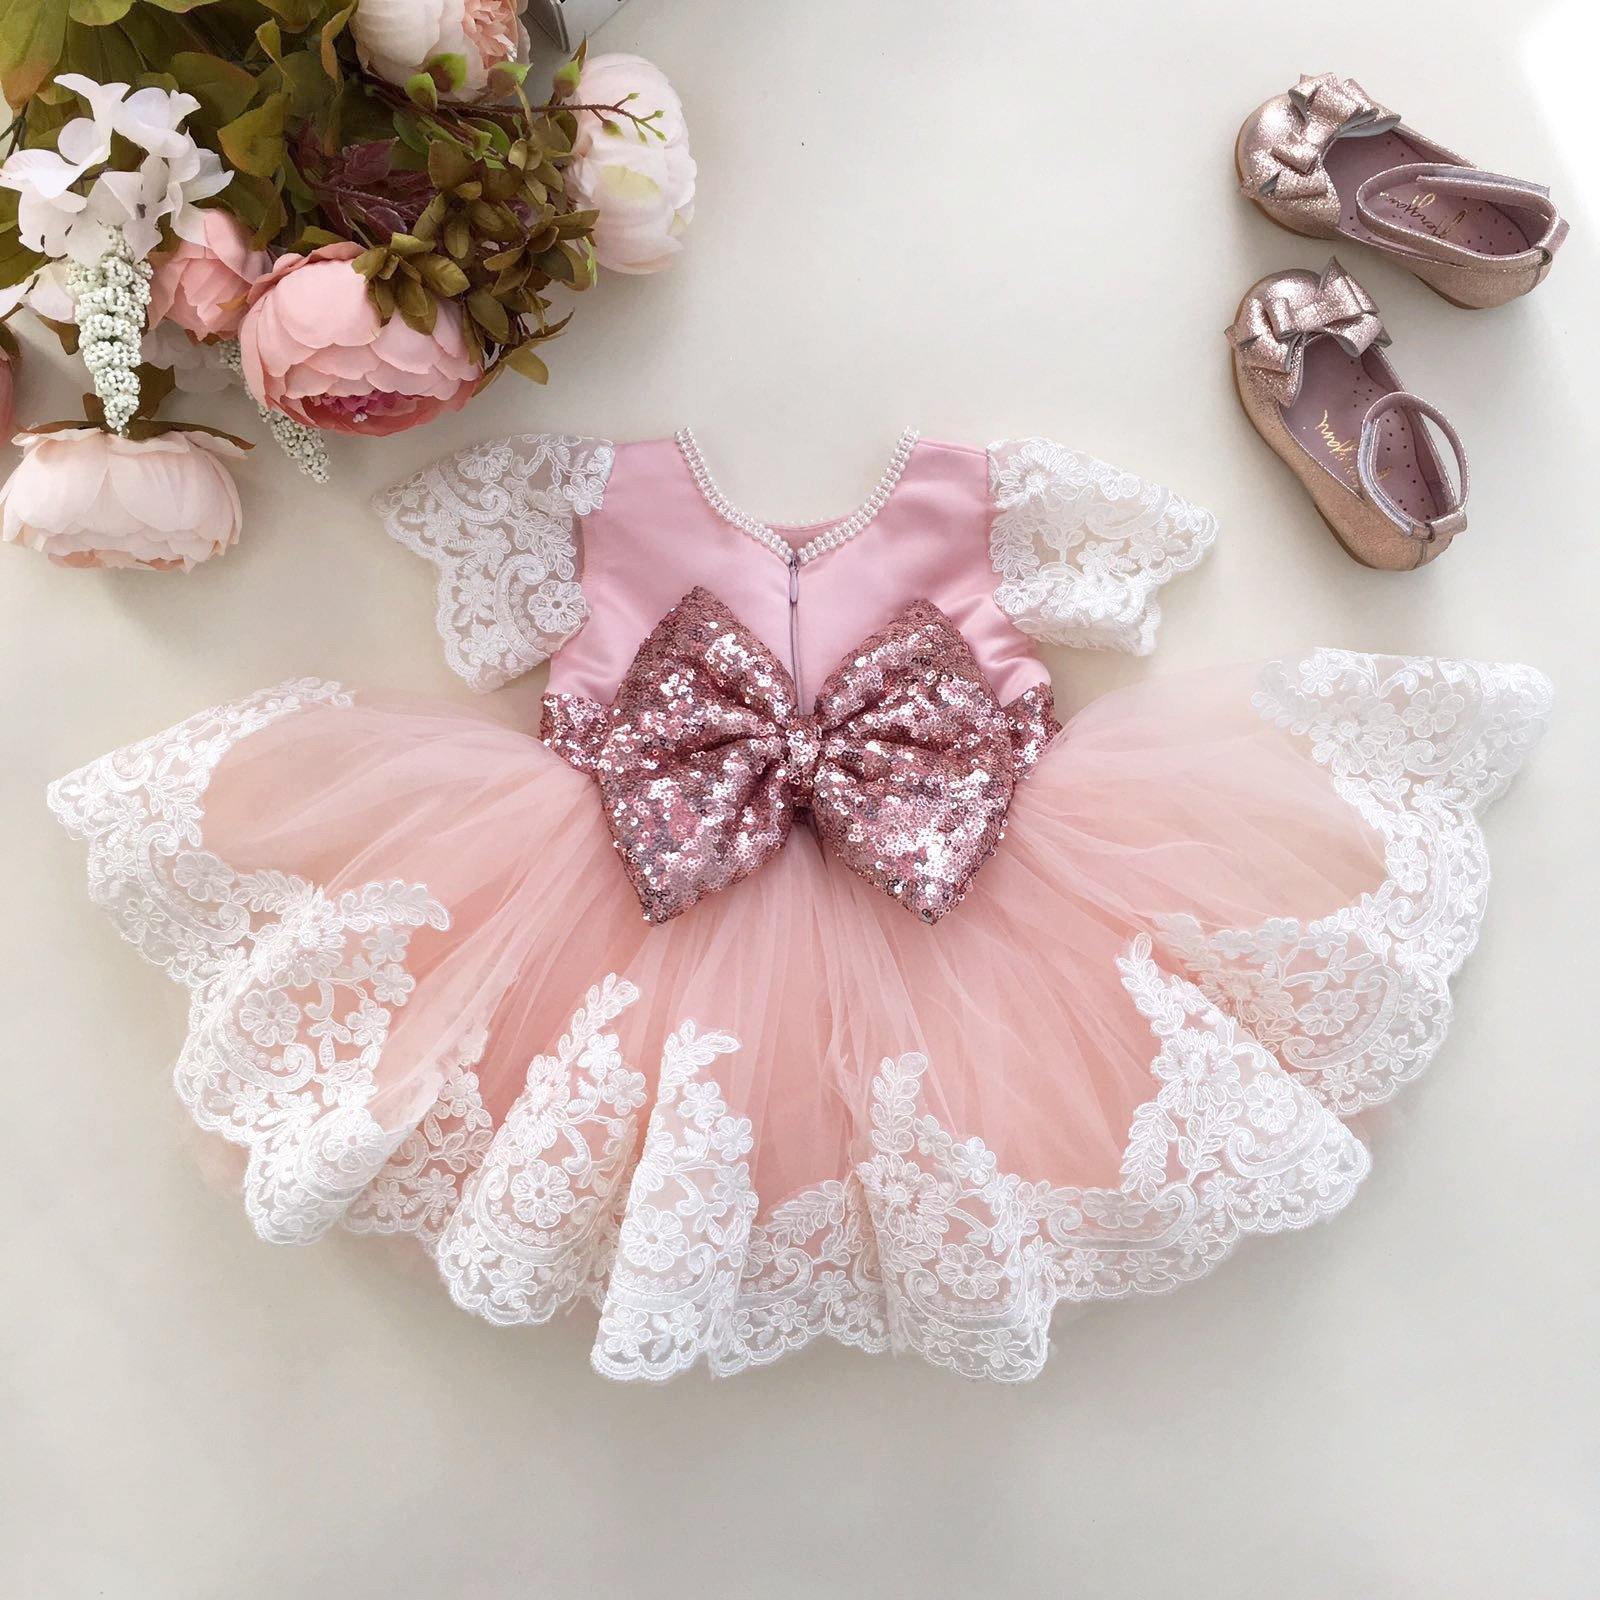 Baby Clothing Born Girl Dress - Dress Clothes New - Aliexpress